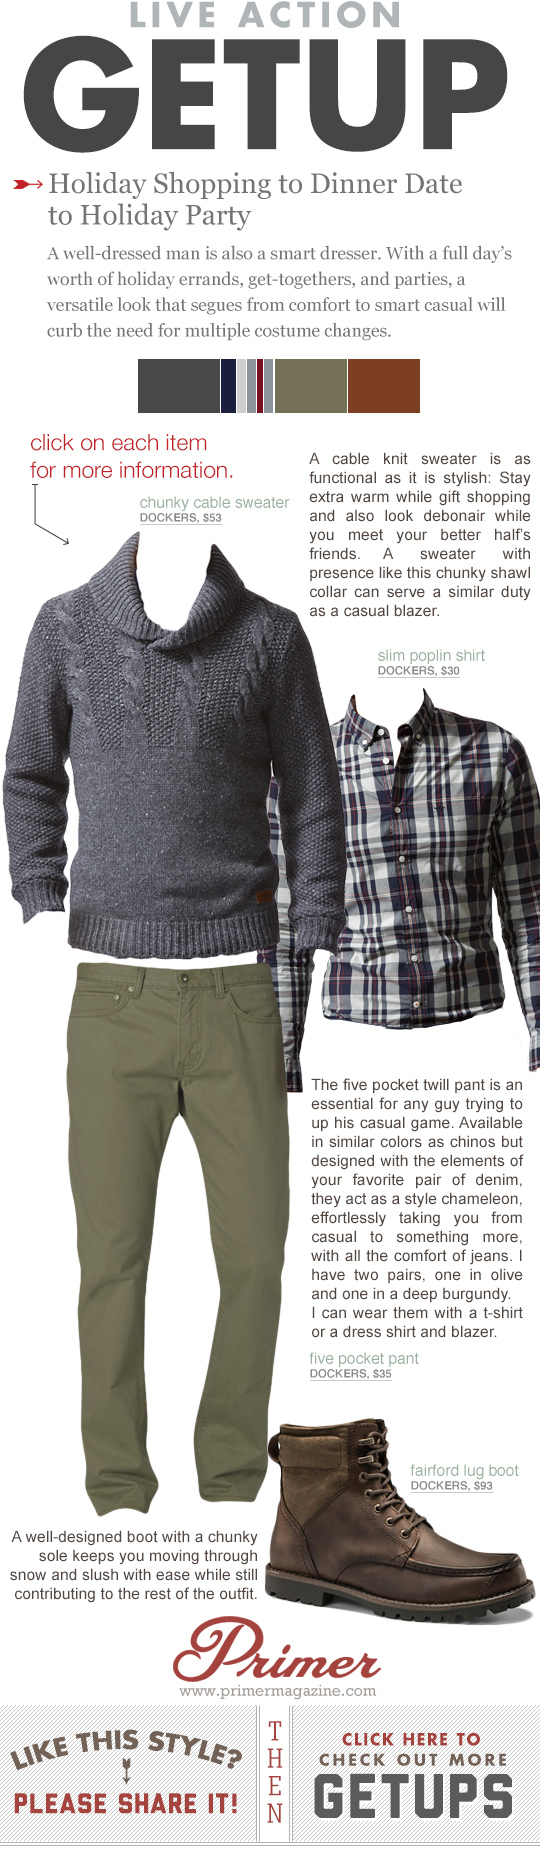 Men's casual winter outfit